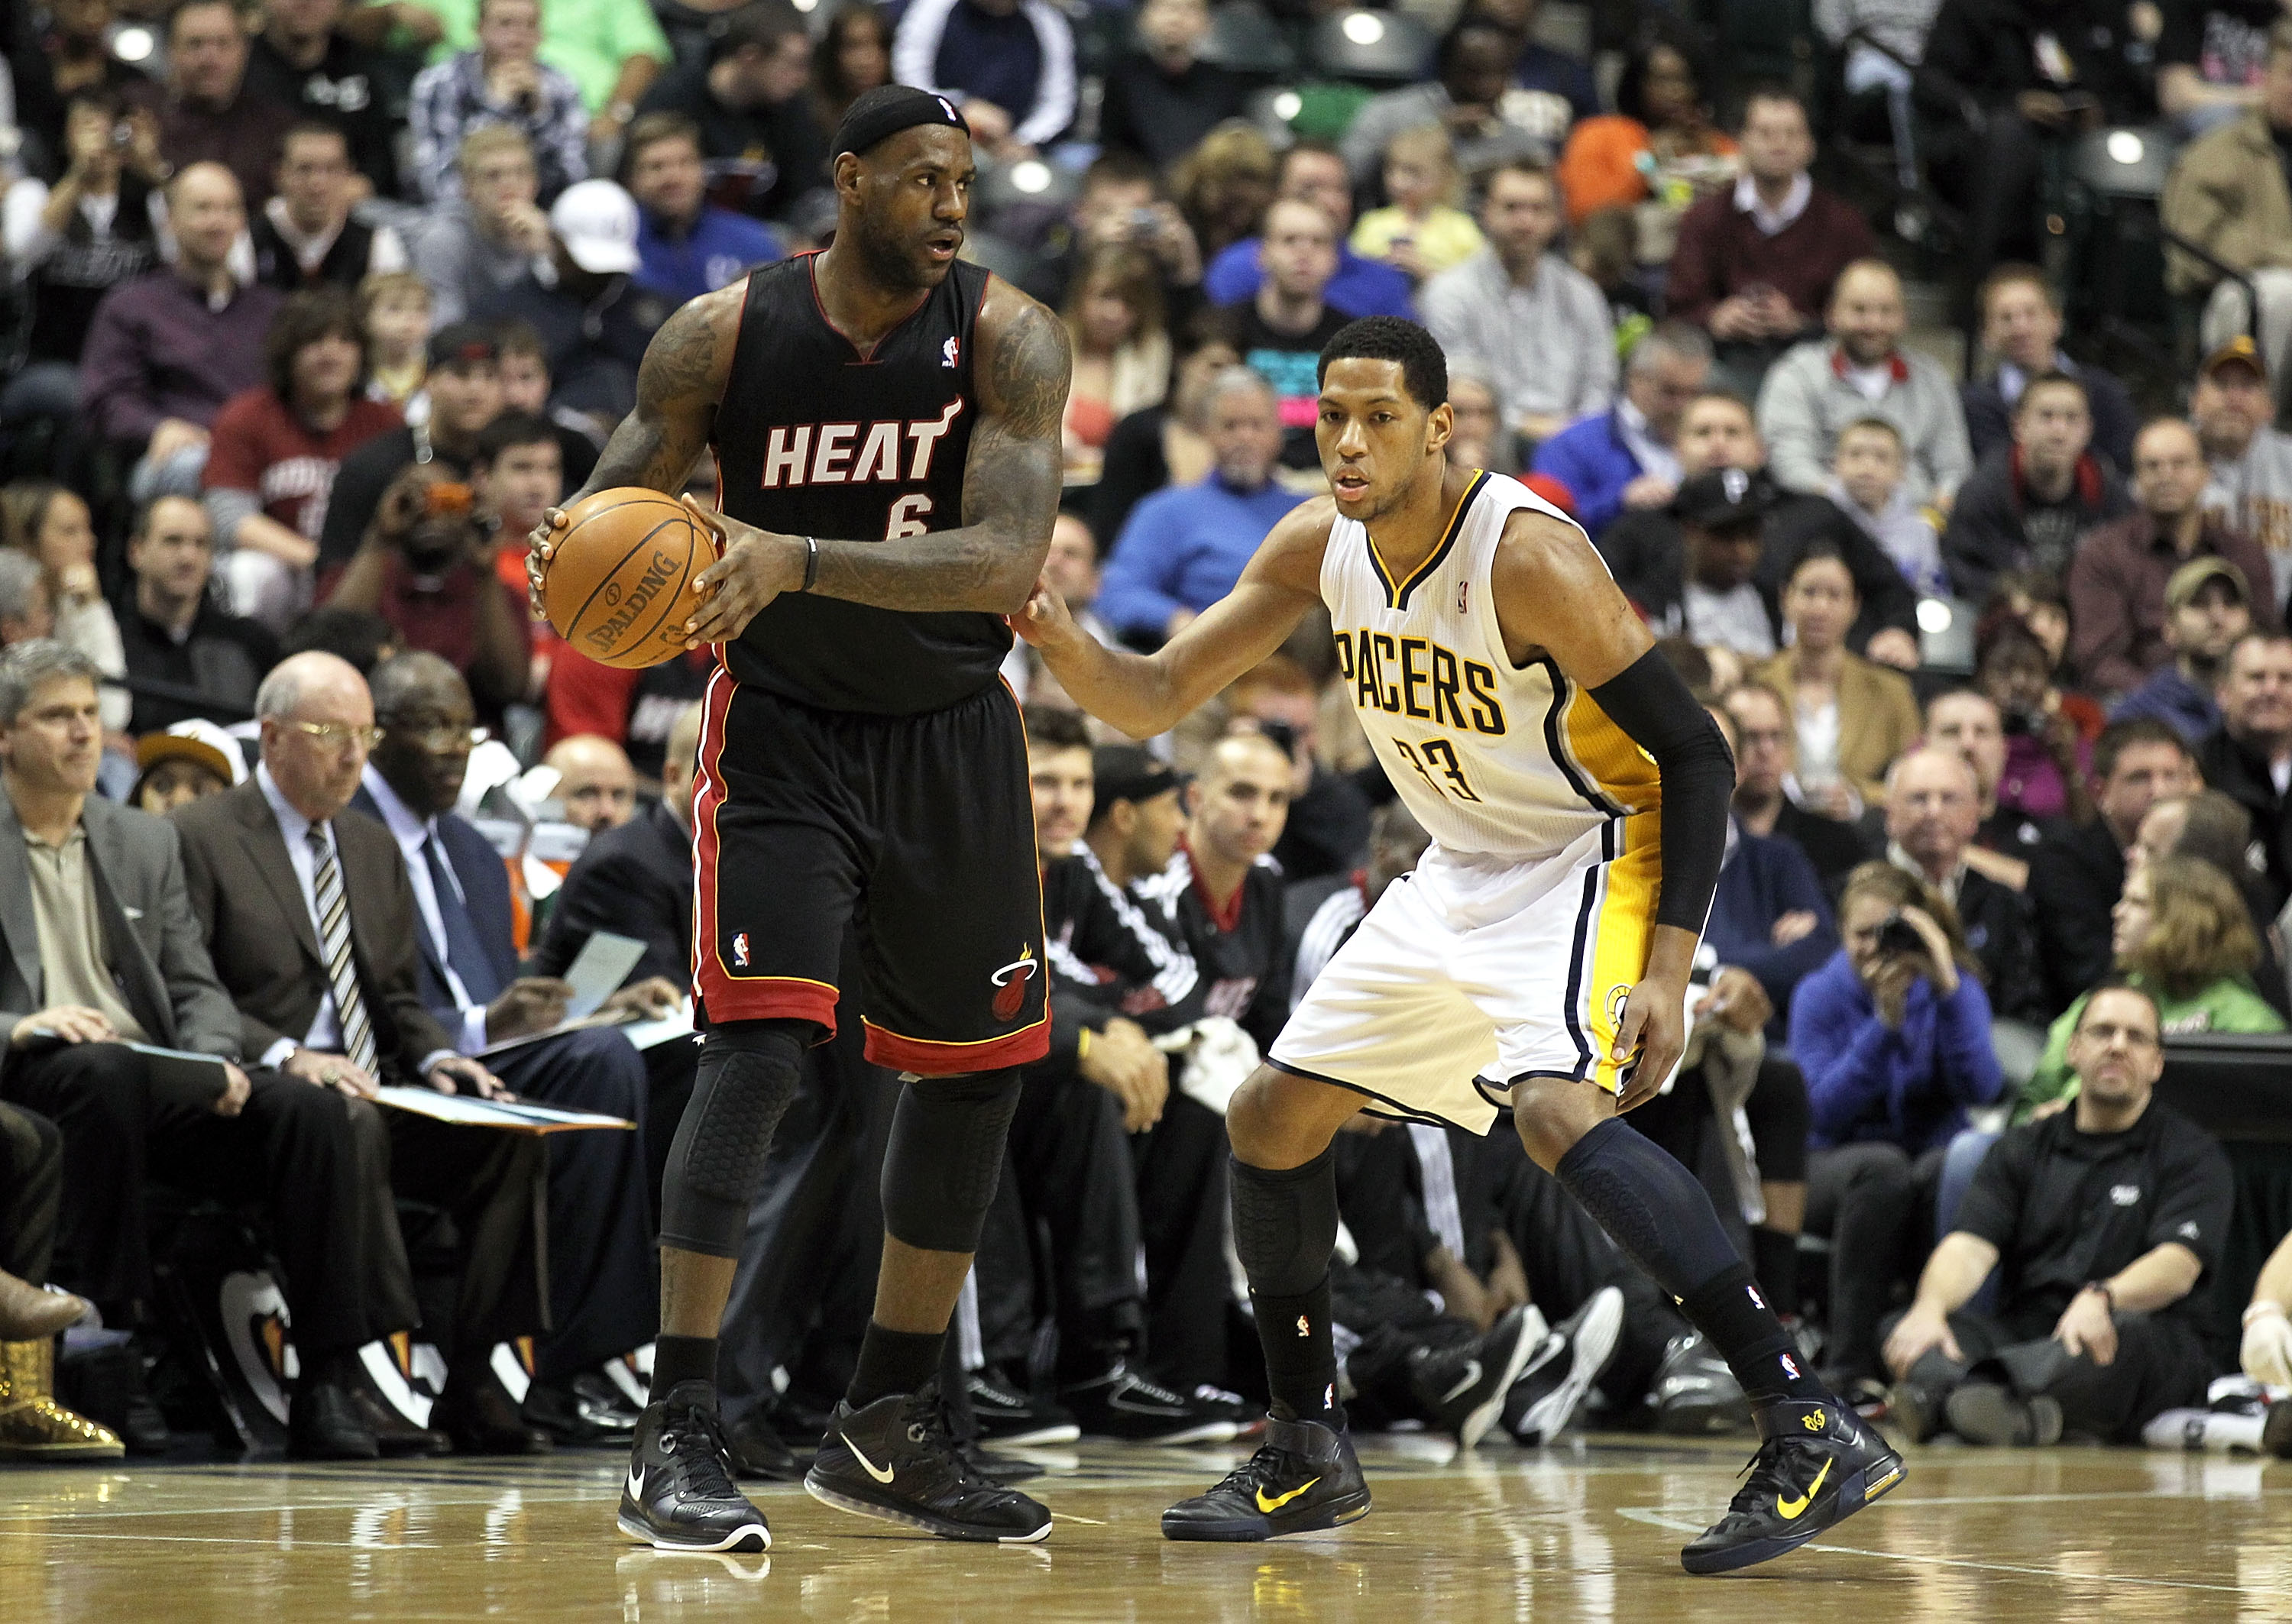 INDIANAPOLIS - FEBRUARY 15: LeBron James #6 of the Miami Heat is guarded by Danny Granger #33 of the Indiana Pacers during the NBA game at Conseco Fieldhouse on February 15, 2011 in Indianapolis, Indiana.   The Heat won 110-103.   NOTE TO USER: User expre